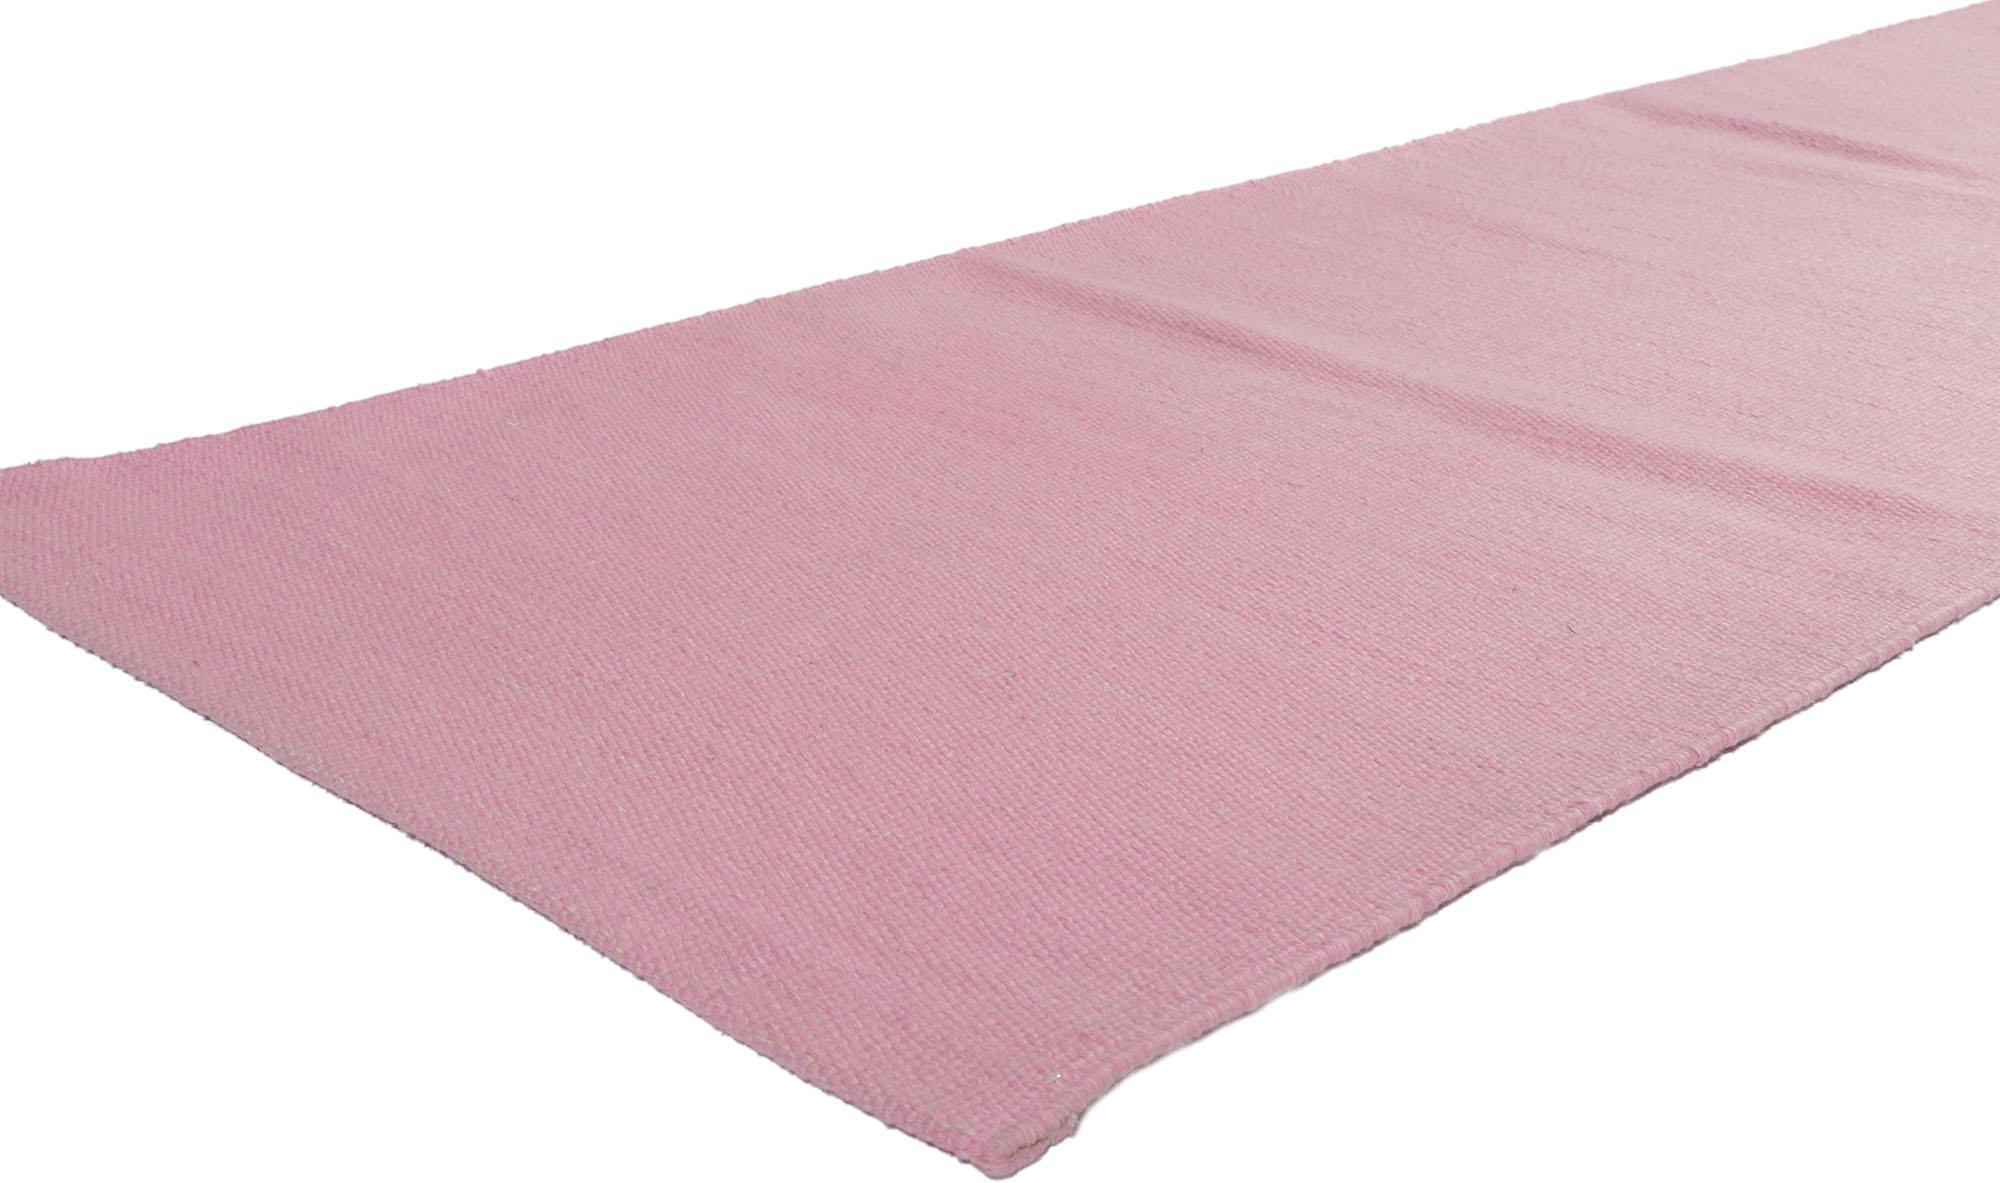 ?30690 new Swedish inspired pink Kilim Runner with Scandinavian Modern style 03'01 x 11'09. ??From subtle to sensation with bohemian hygge vibes, this hand-woven wool Swedish inspired pink Kilim runner beautifully embodies the simplicity of